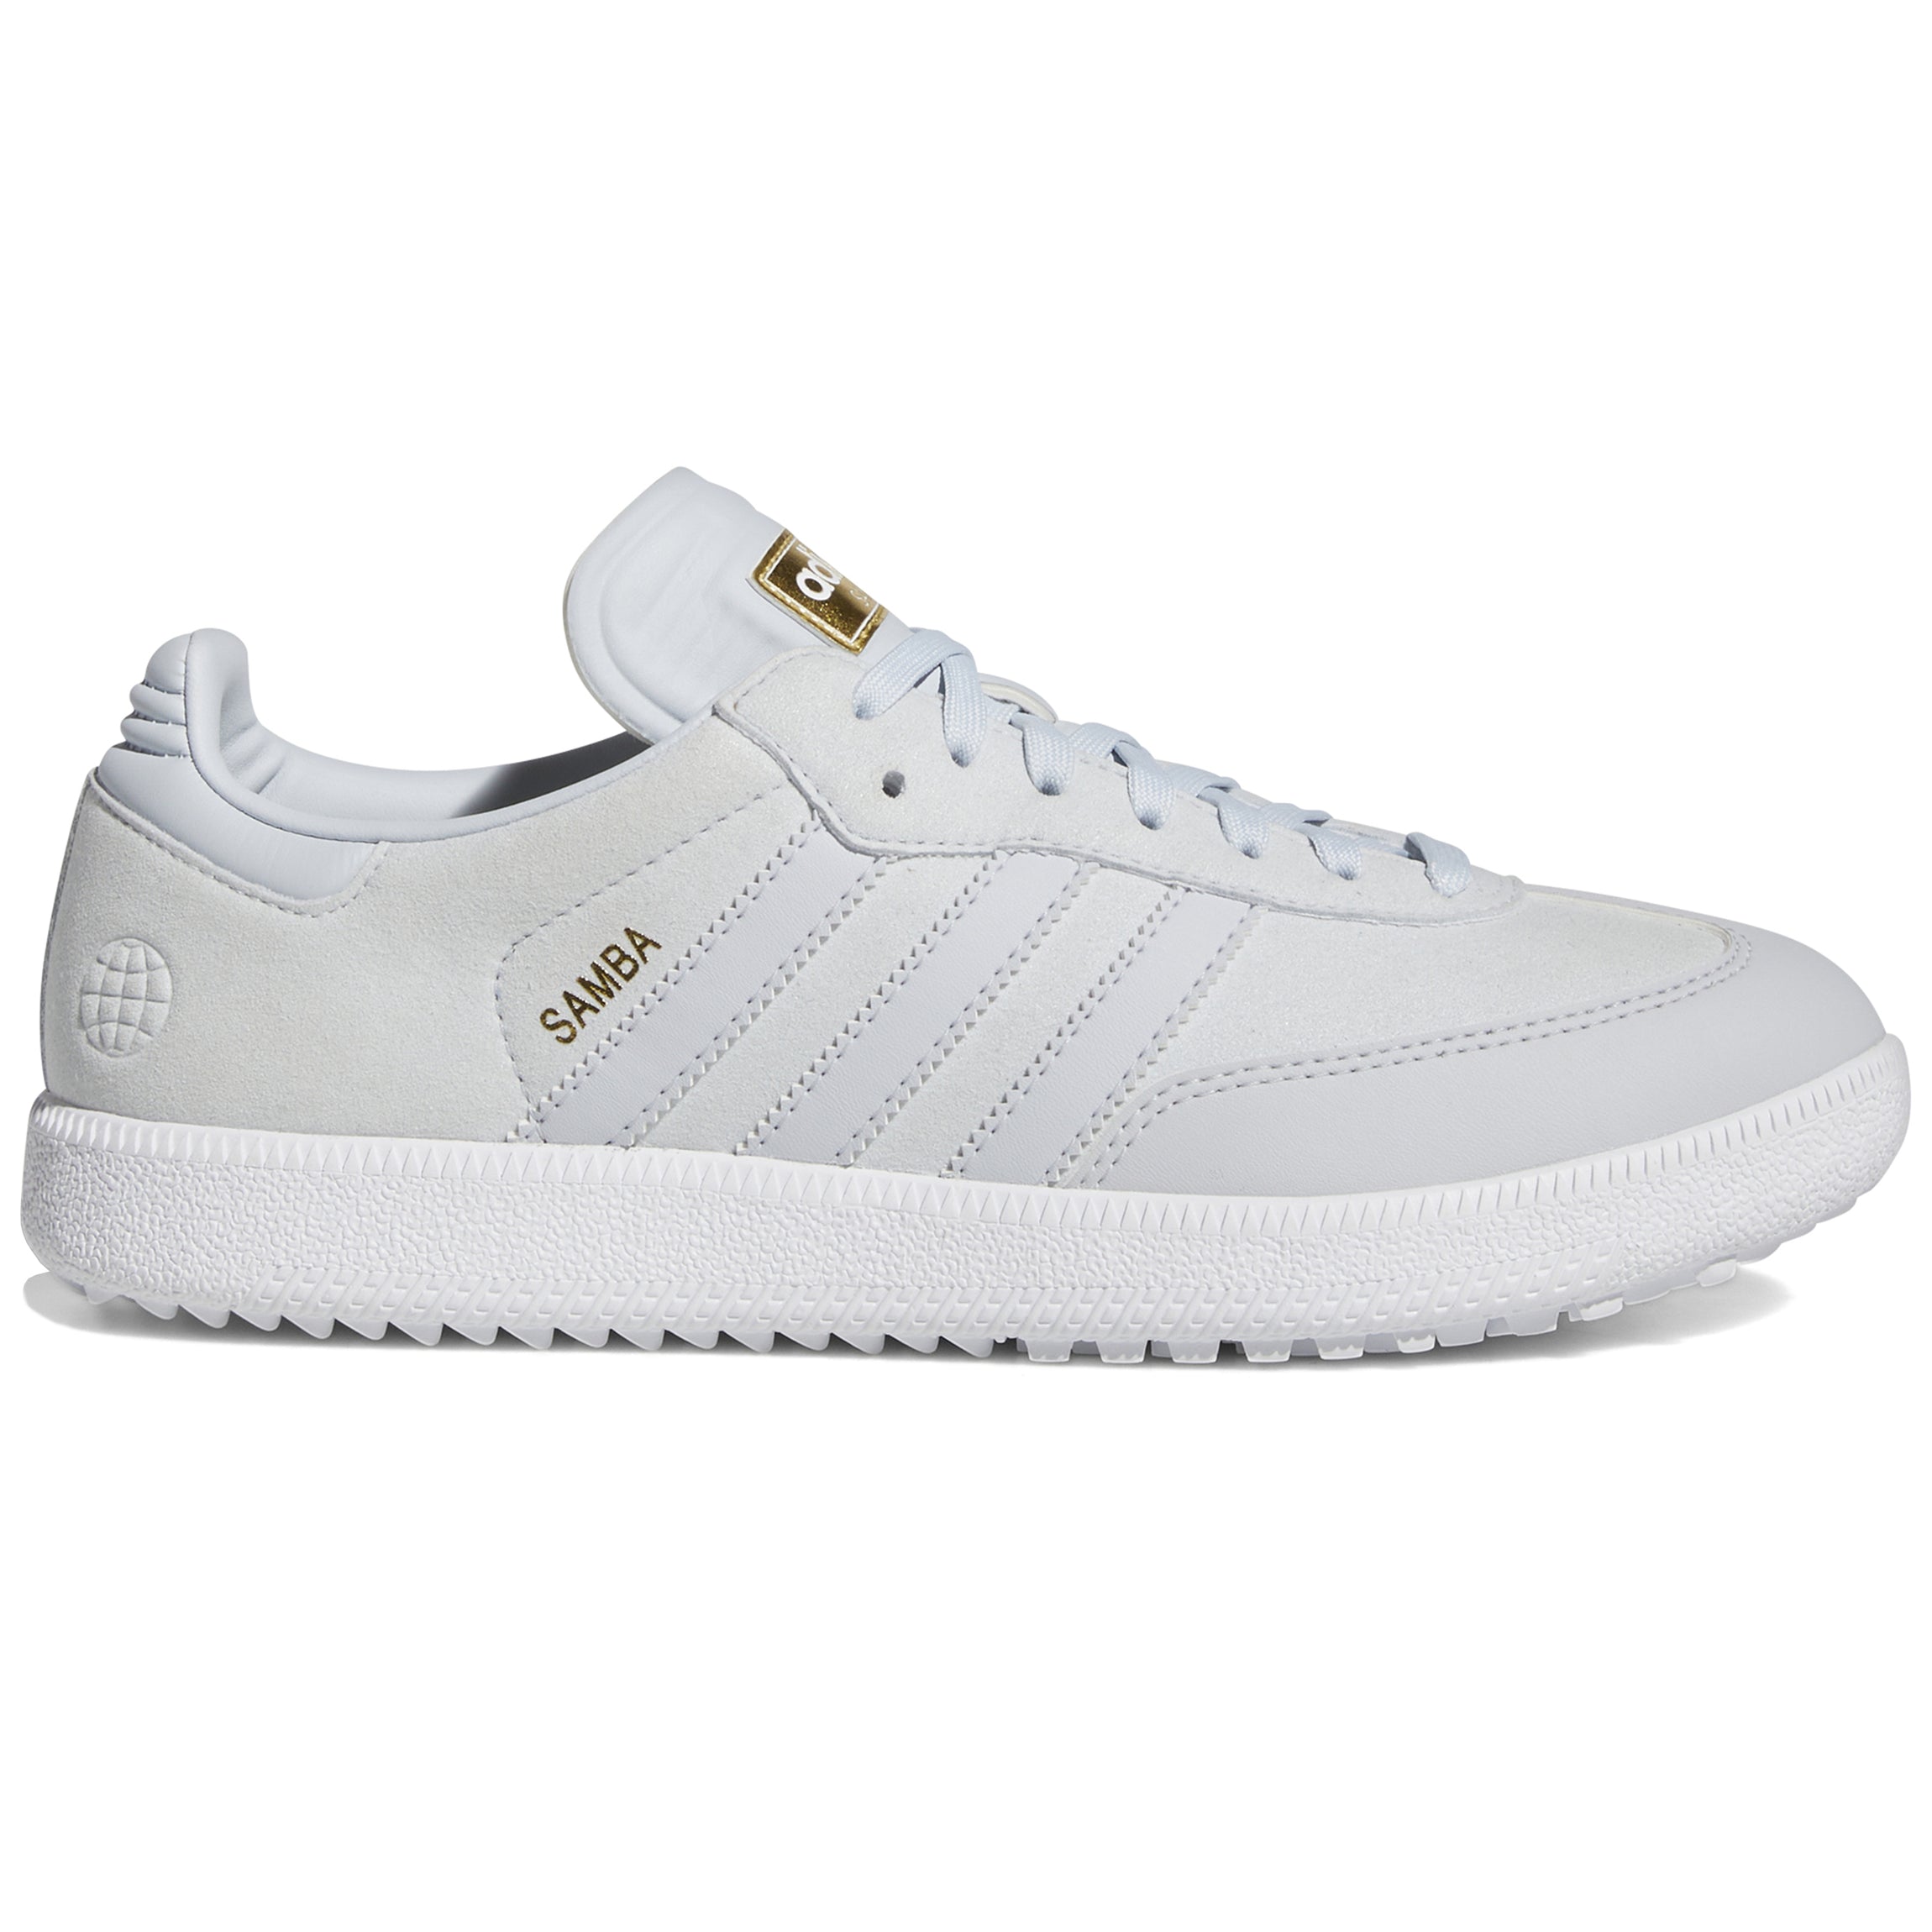 adidas Samba Spikeless LE Golf Shoes HP7876 Halo White | Function18 | Restrictedgs